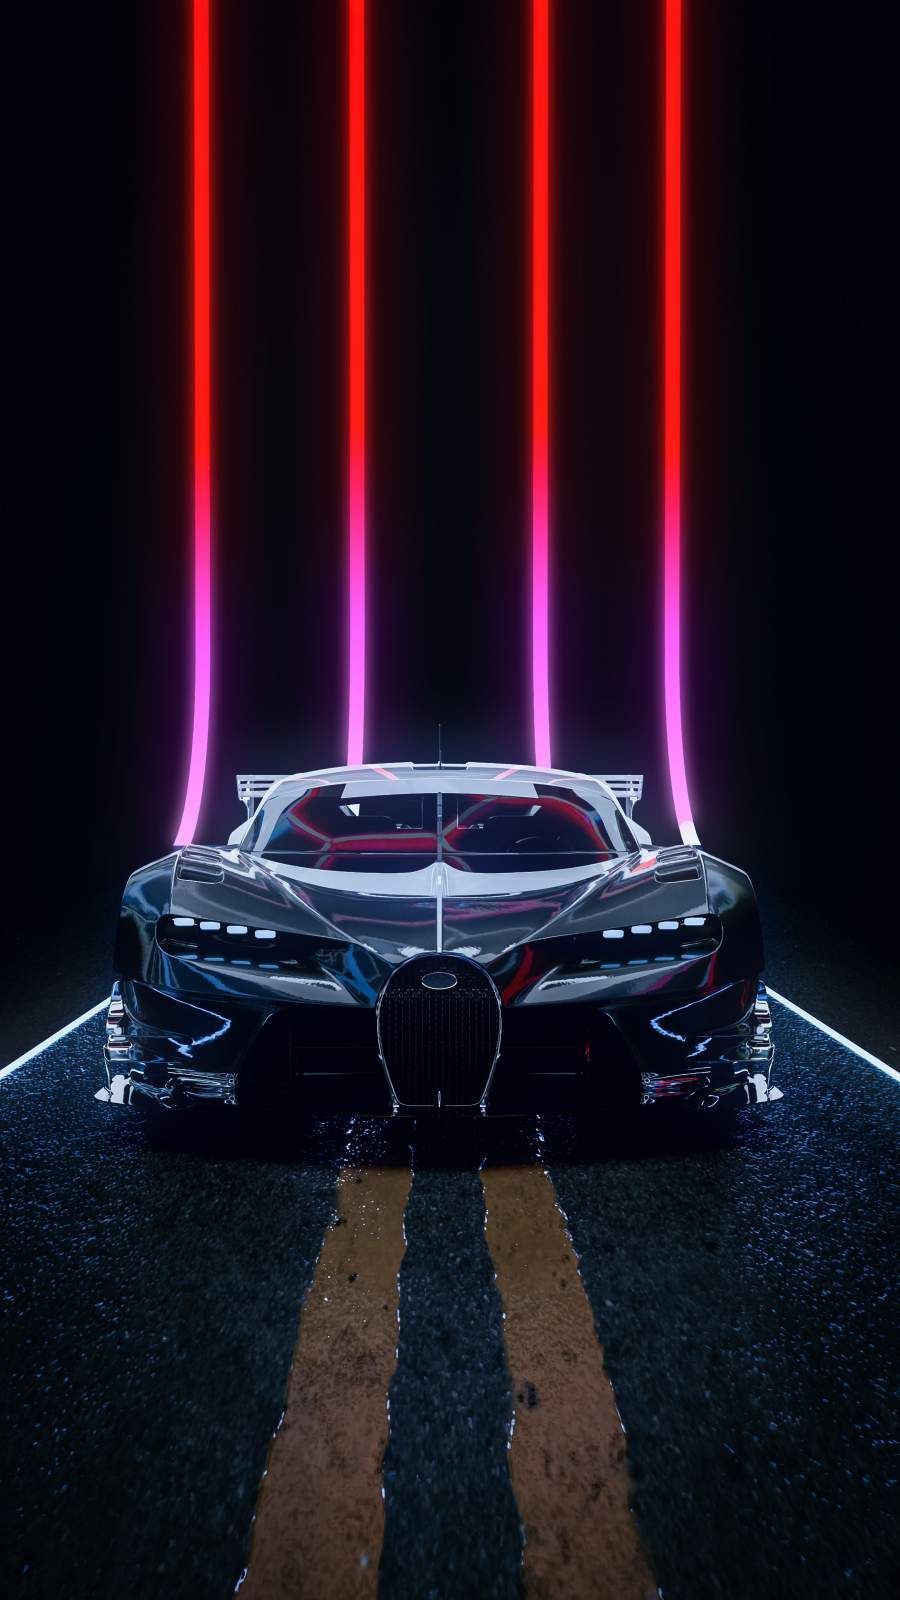 iPhone Wallpaper for iPhone iPhone iPhone X, iPhone XR, iPhone 8 Plus High Quality Wallpaper, iP. Bugatti wallpaper, Car iphone wallpaper, Bugatti cars